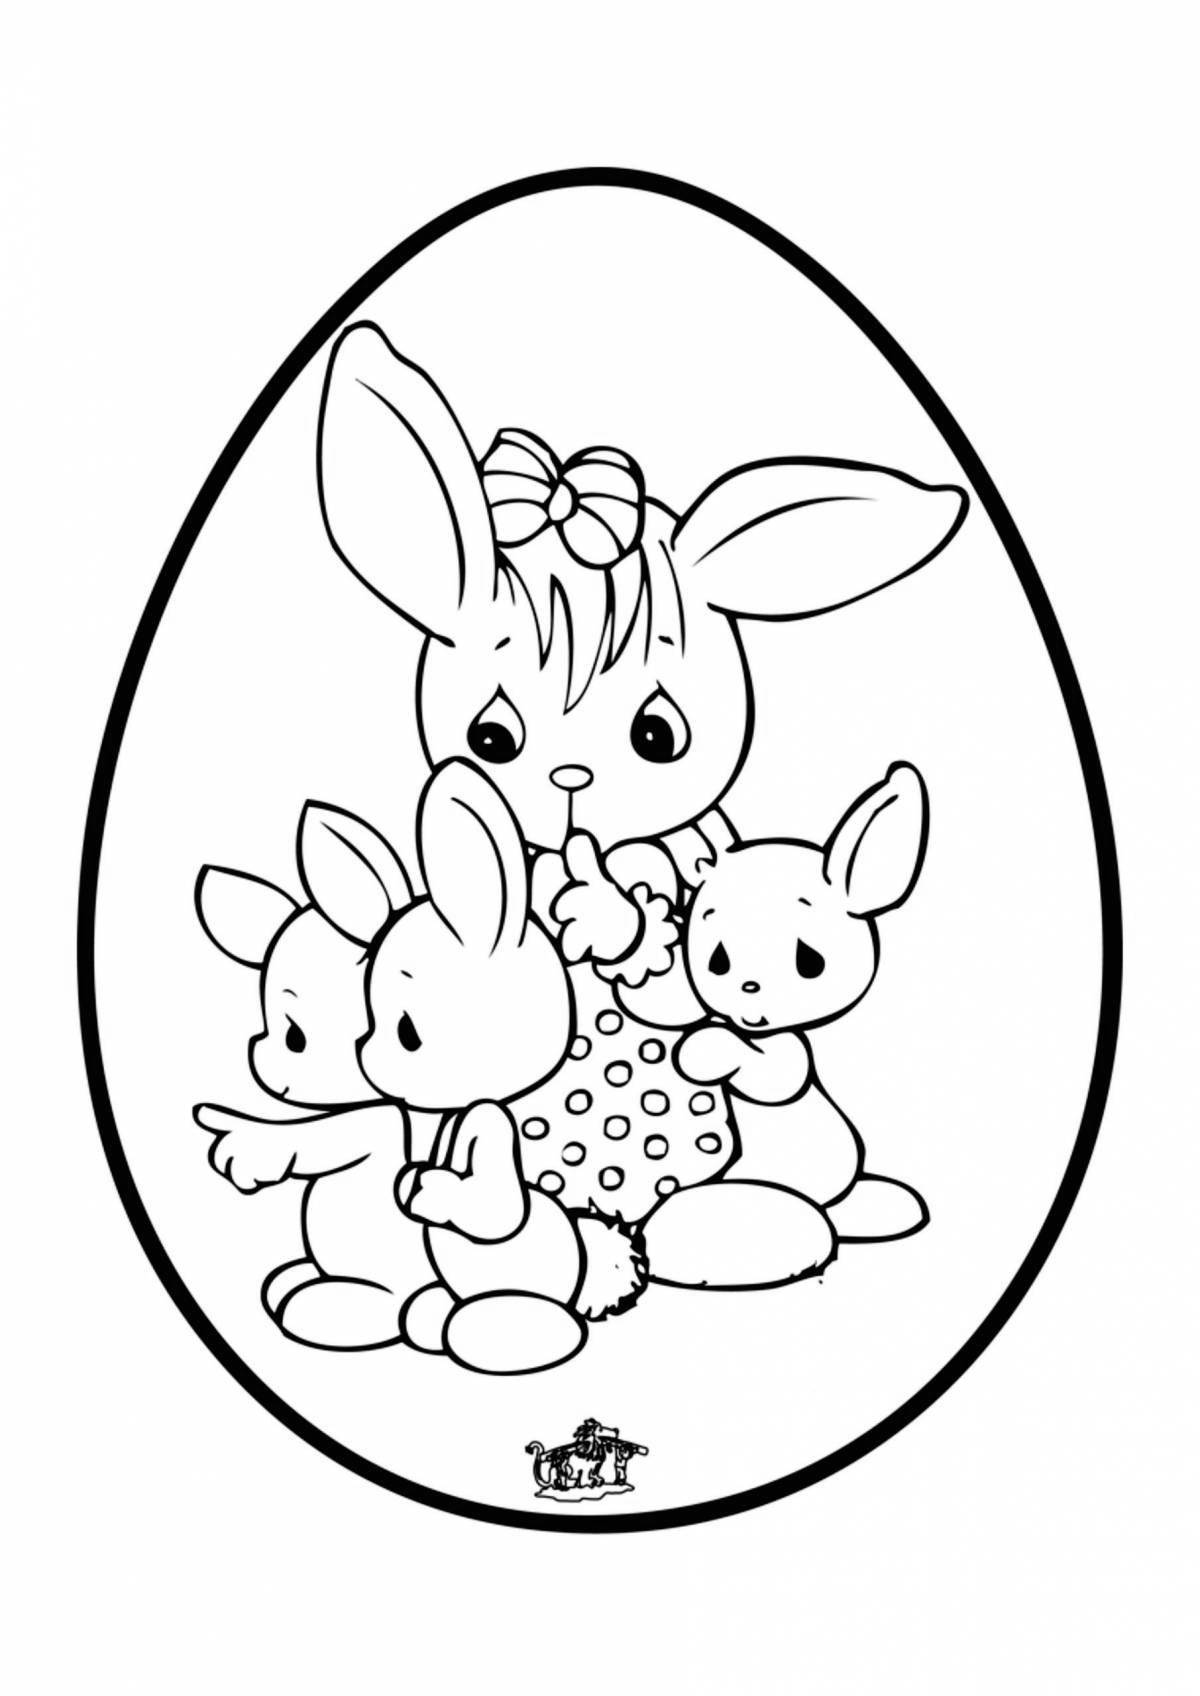 Fluffy coloring book for bunny girls